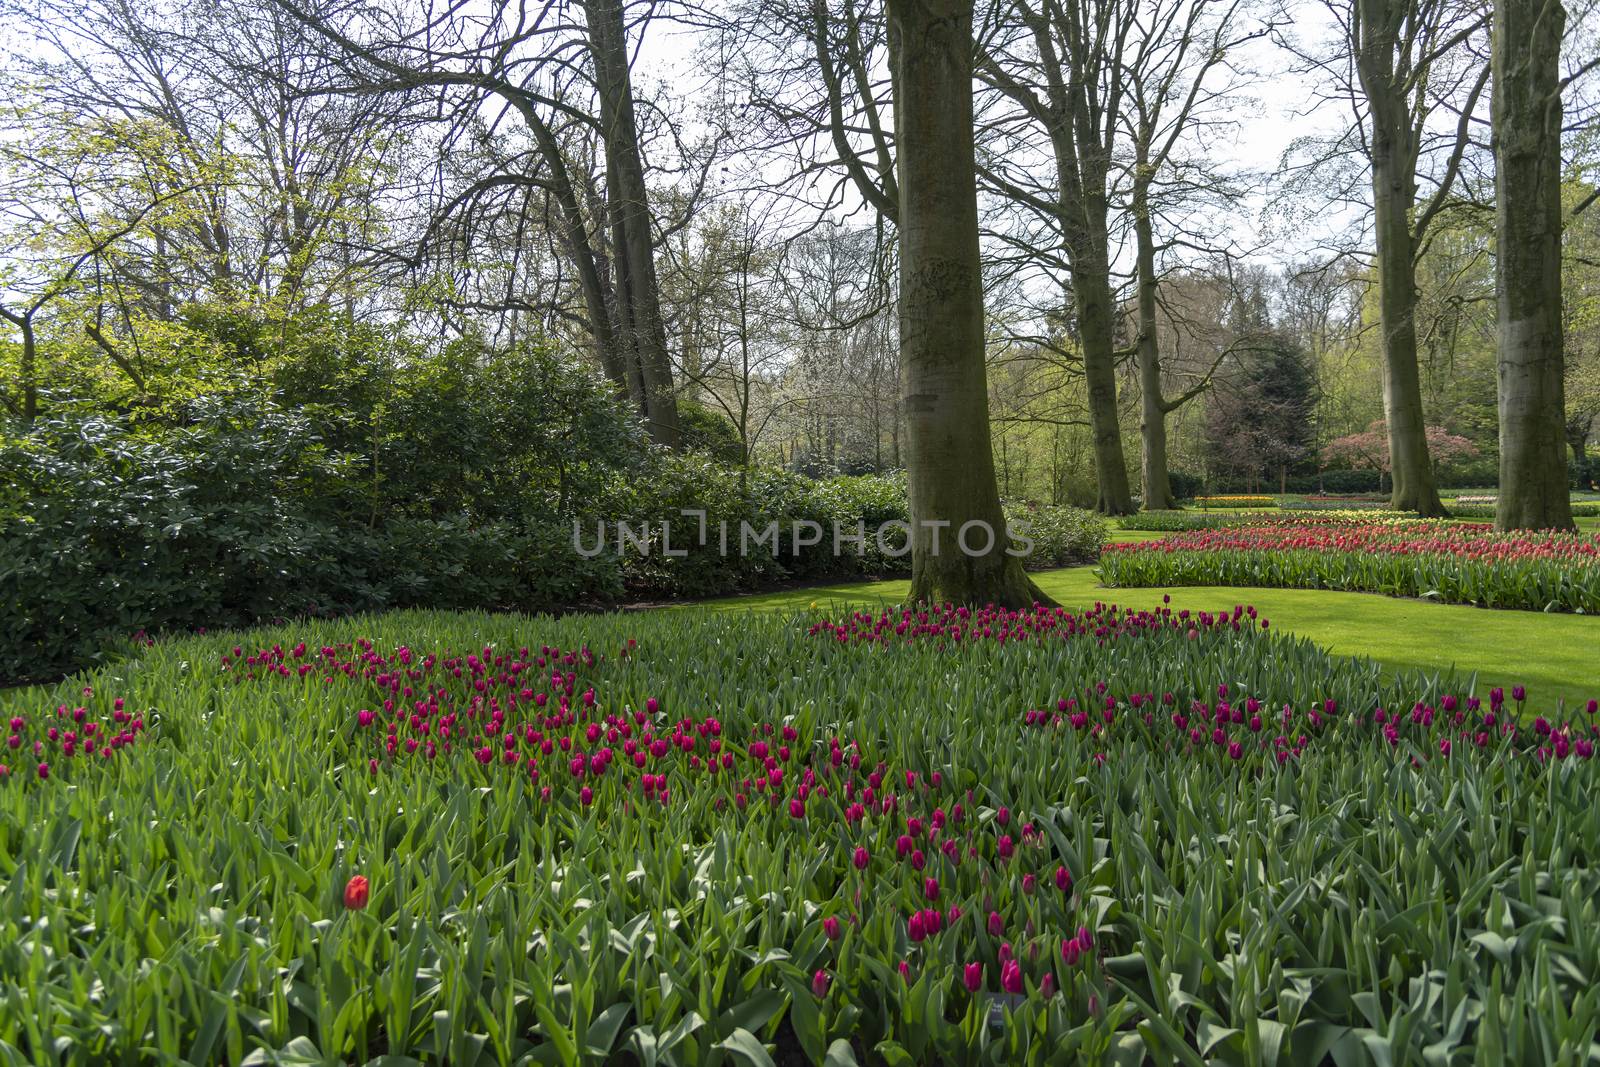 Deep purple color tulips blossom blooming under a very well maintained garden in spring time